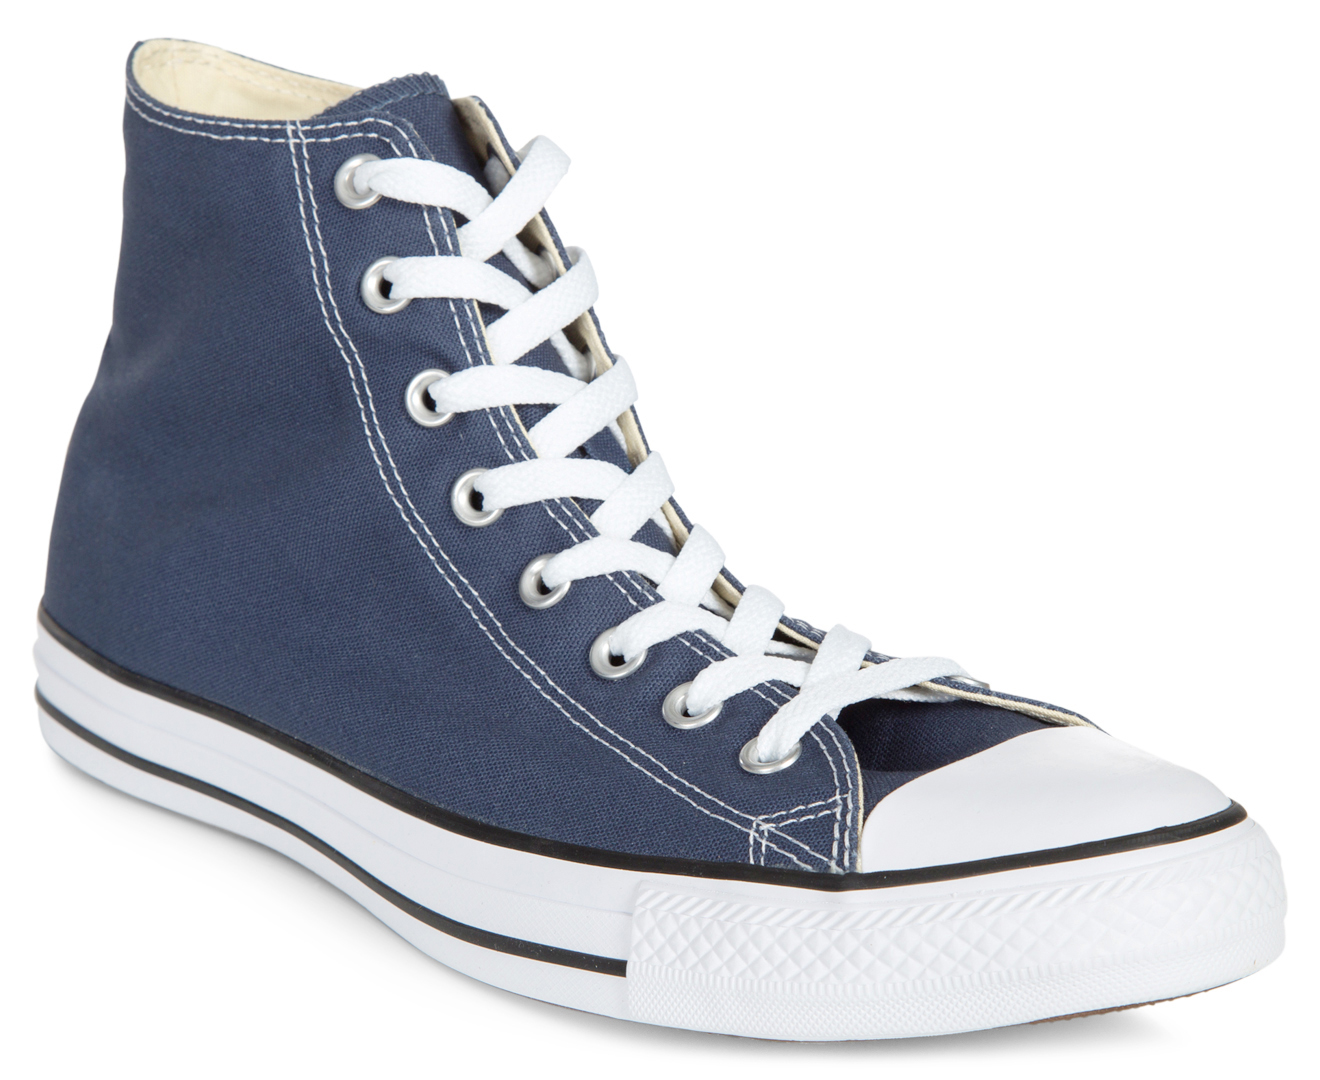 Converse Unisex Chuck Taylor All Star High Top Sneakers - Navy | Catch ...